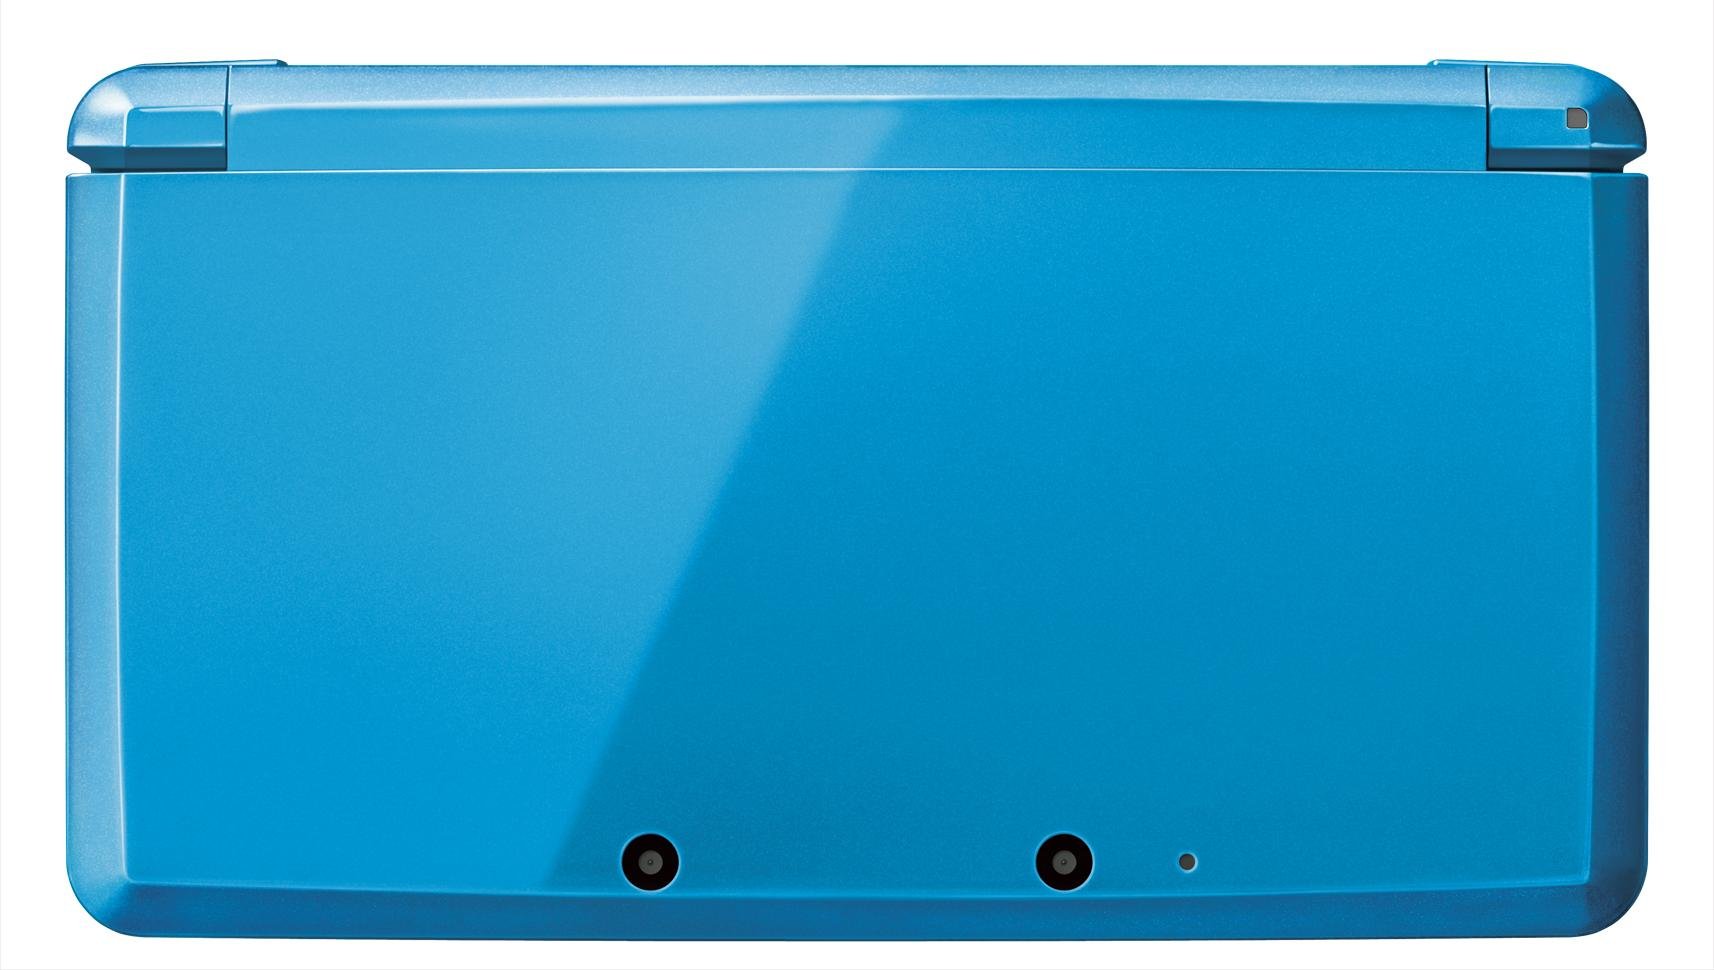 Nintendo 3DS Console-light blue (Japanese Imported Version - only plays Japanese version games)